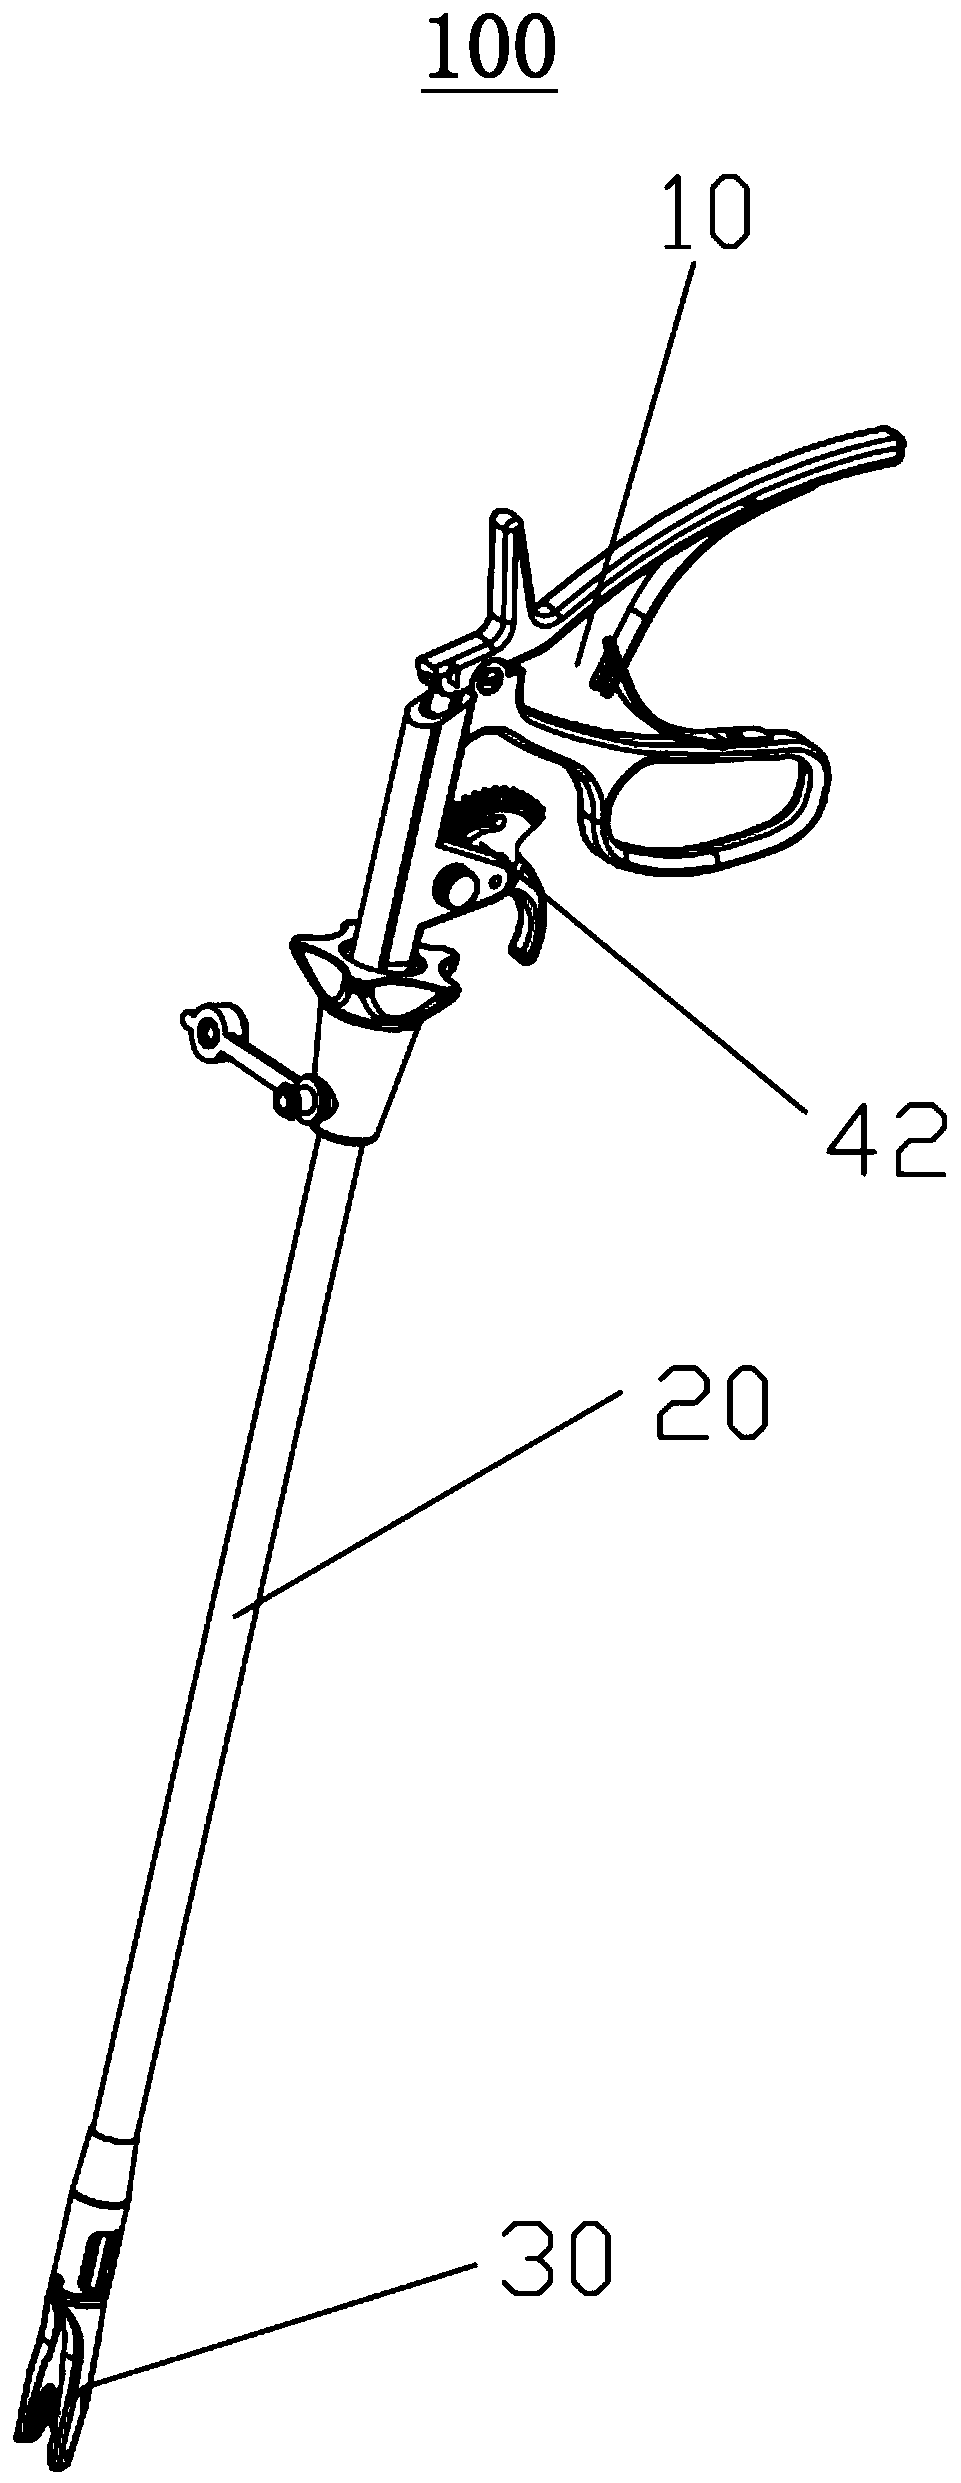 Repeating compressing clamp